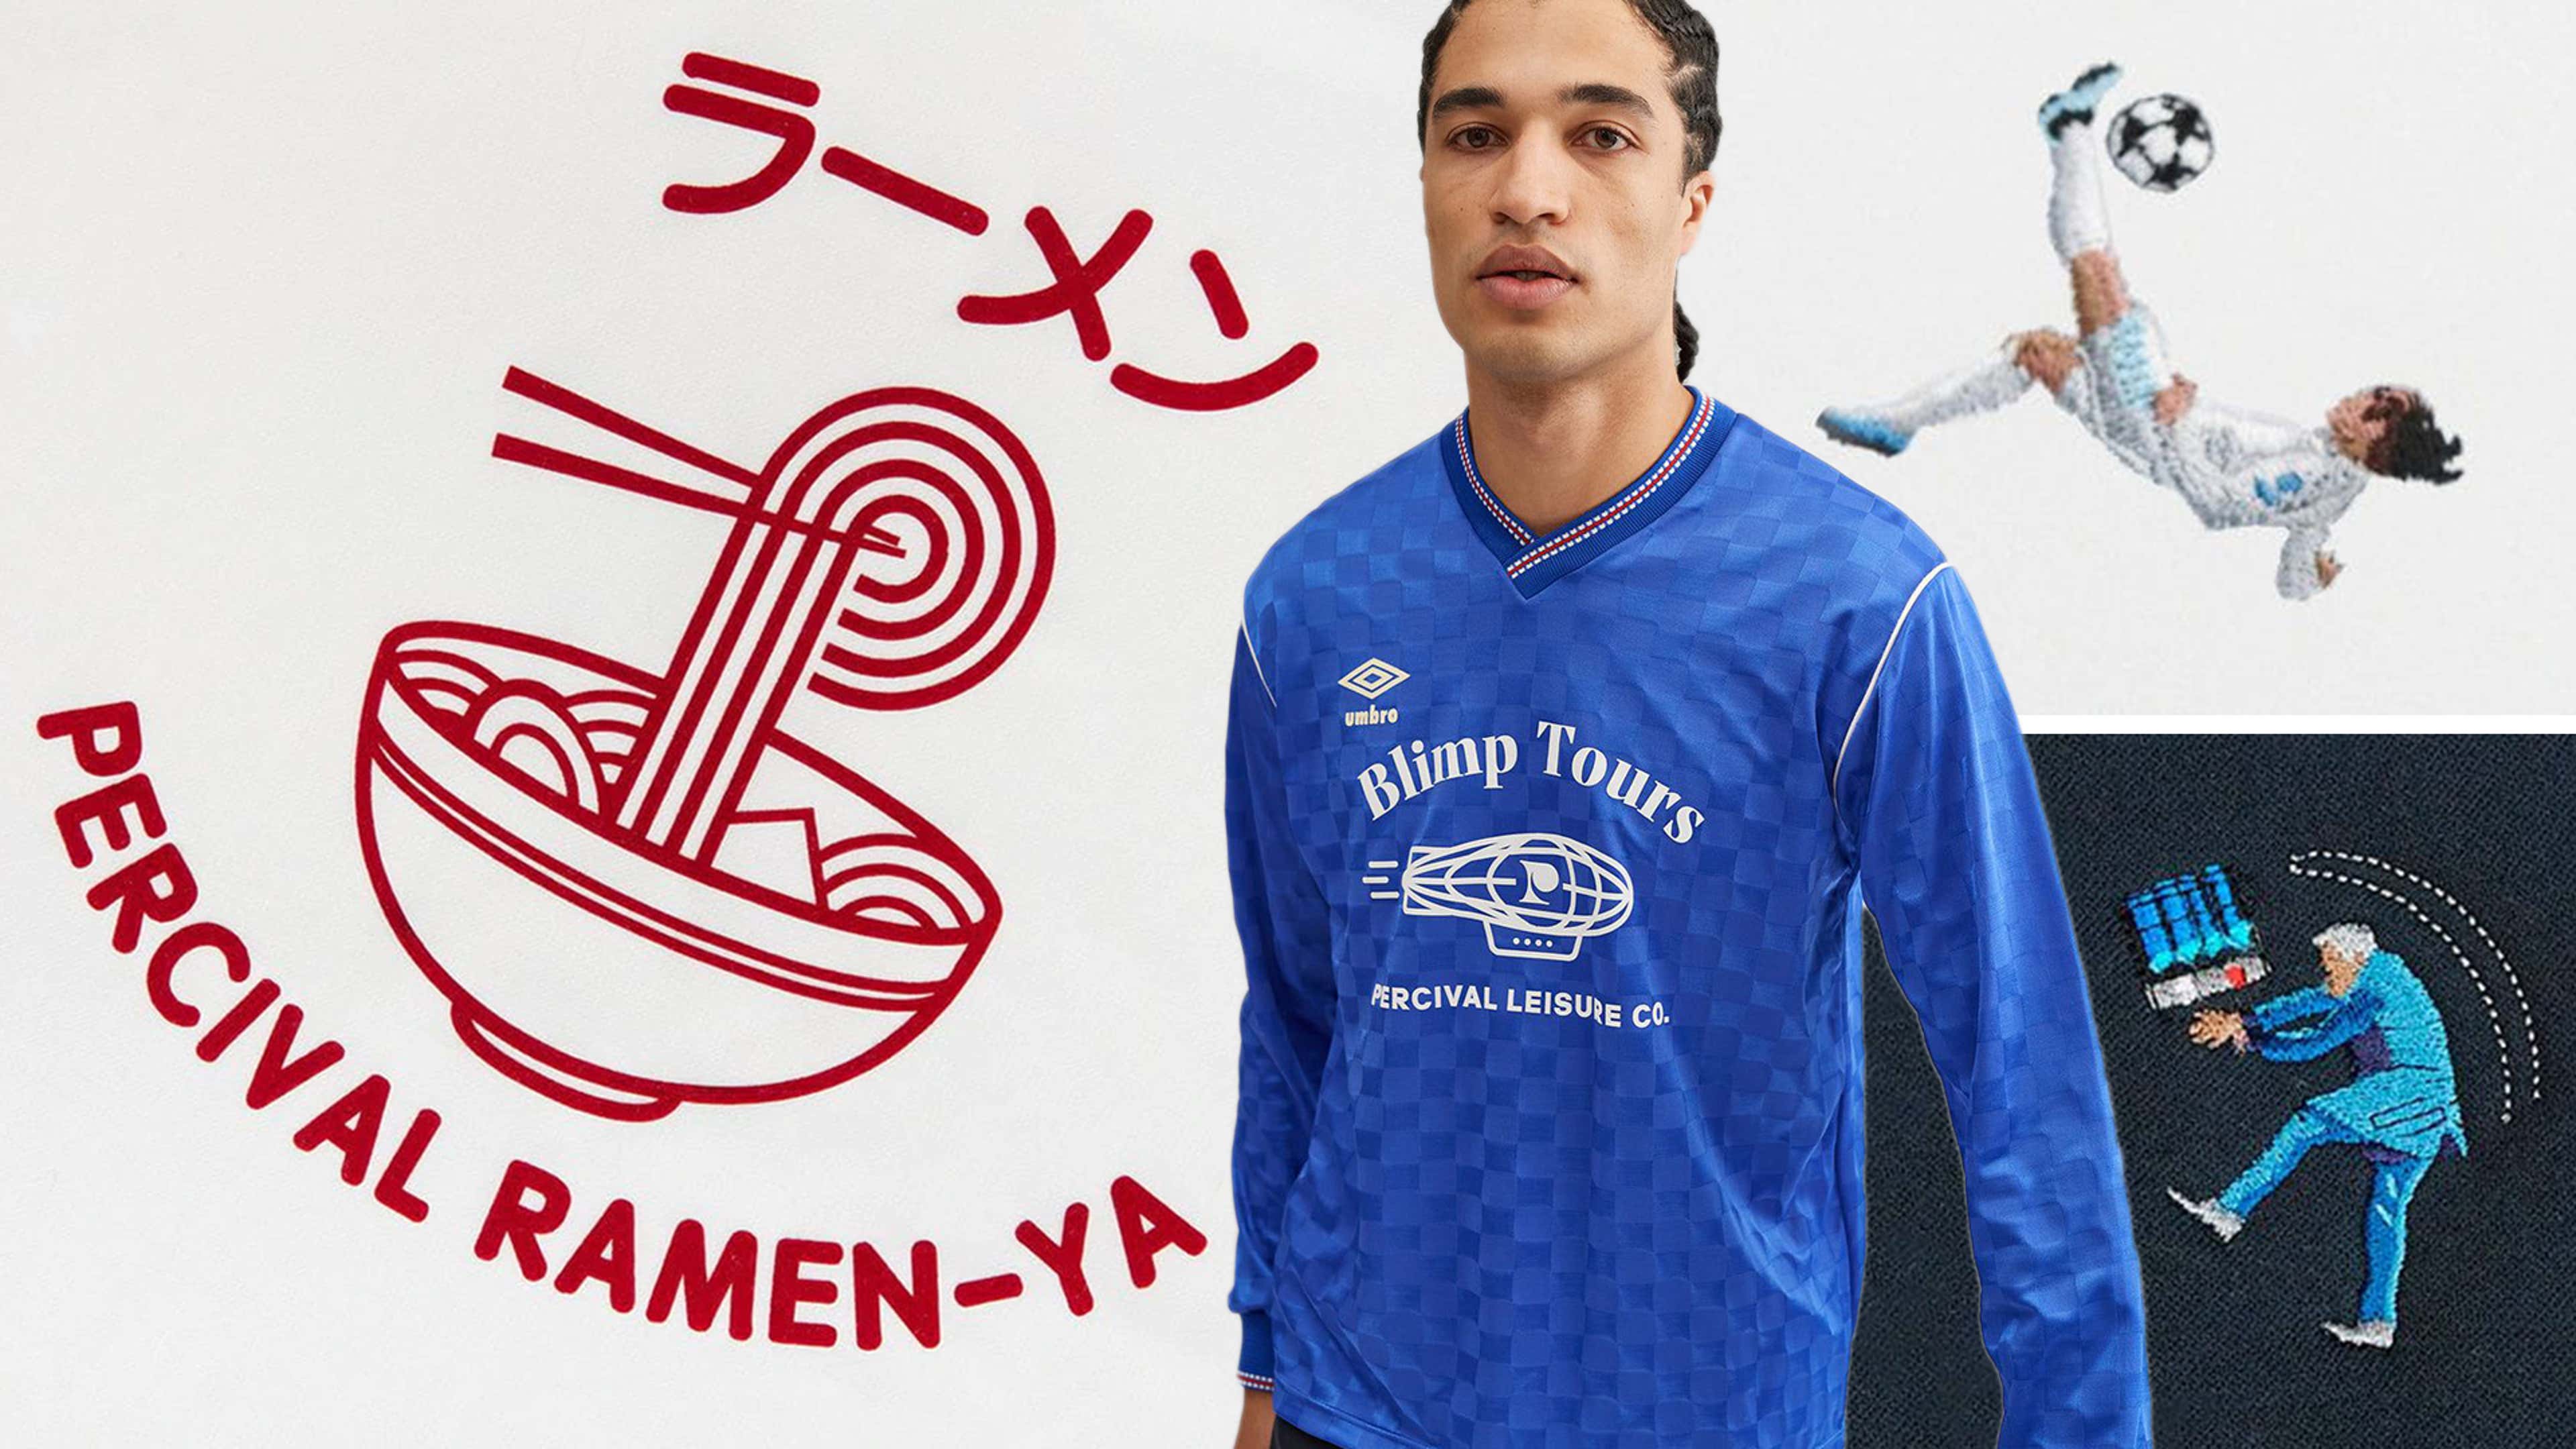 Percival and Classic Football Shirts team up for an exclusive